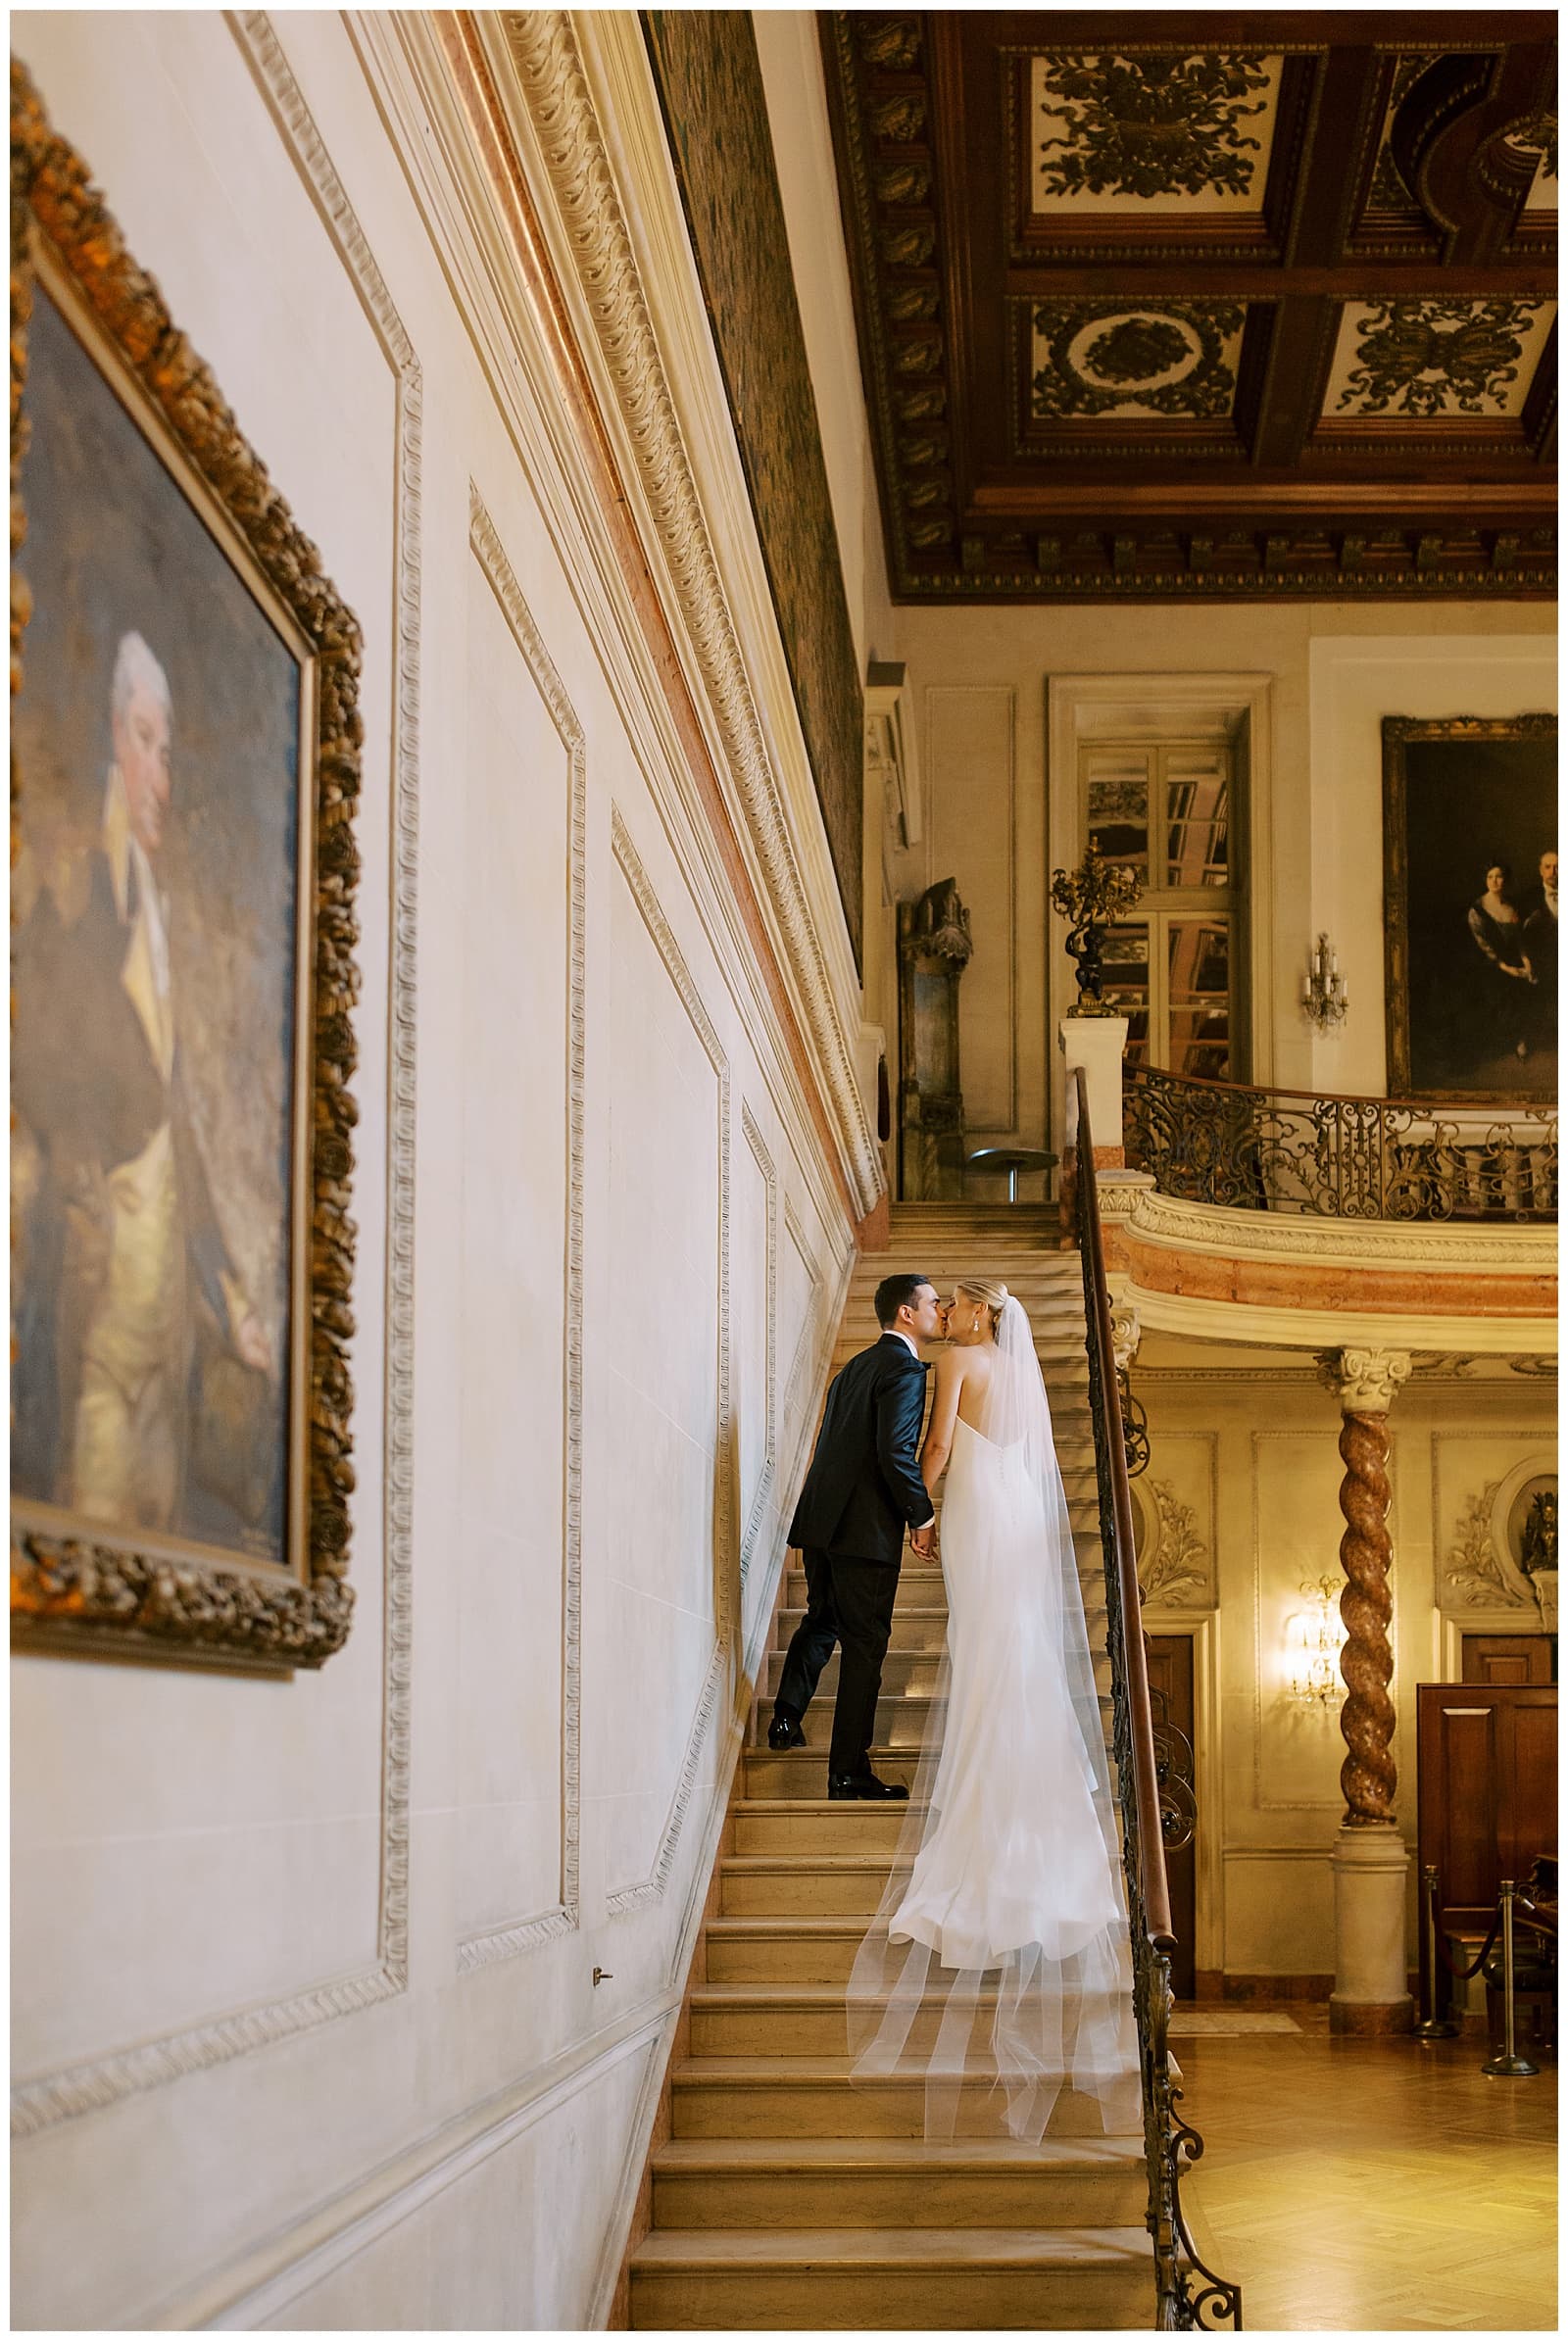 Bride and Groom kissing on the steps of the marble staircase in the Larz Anderson House